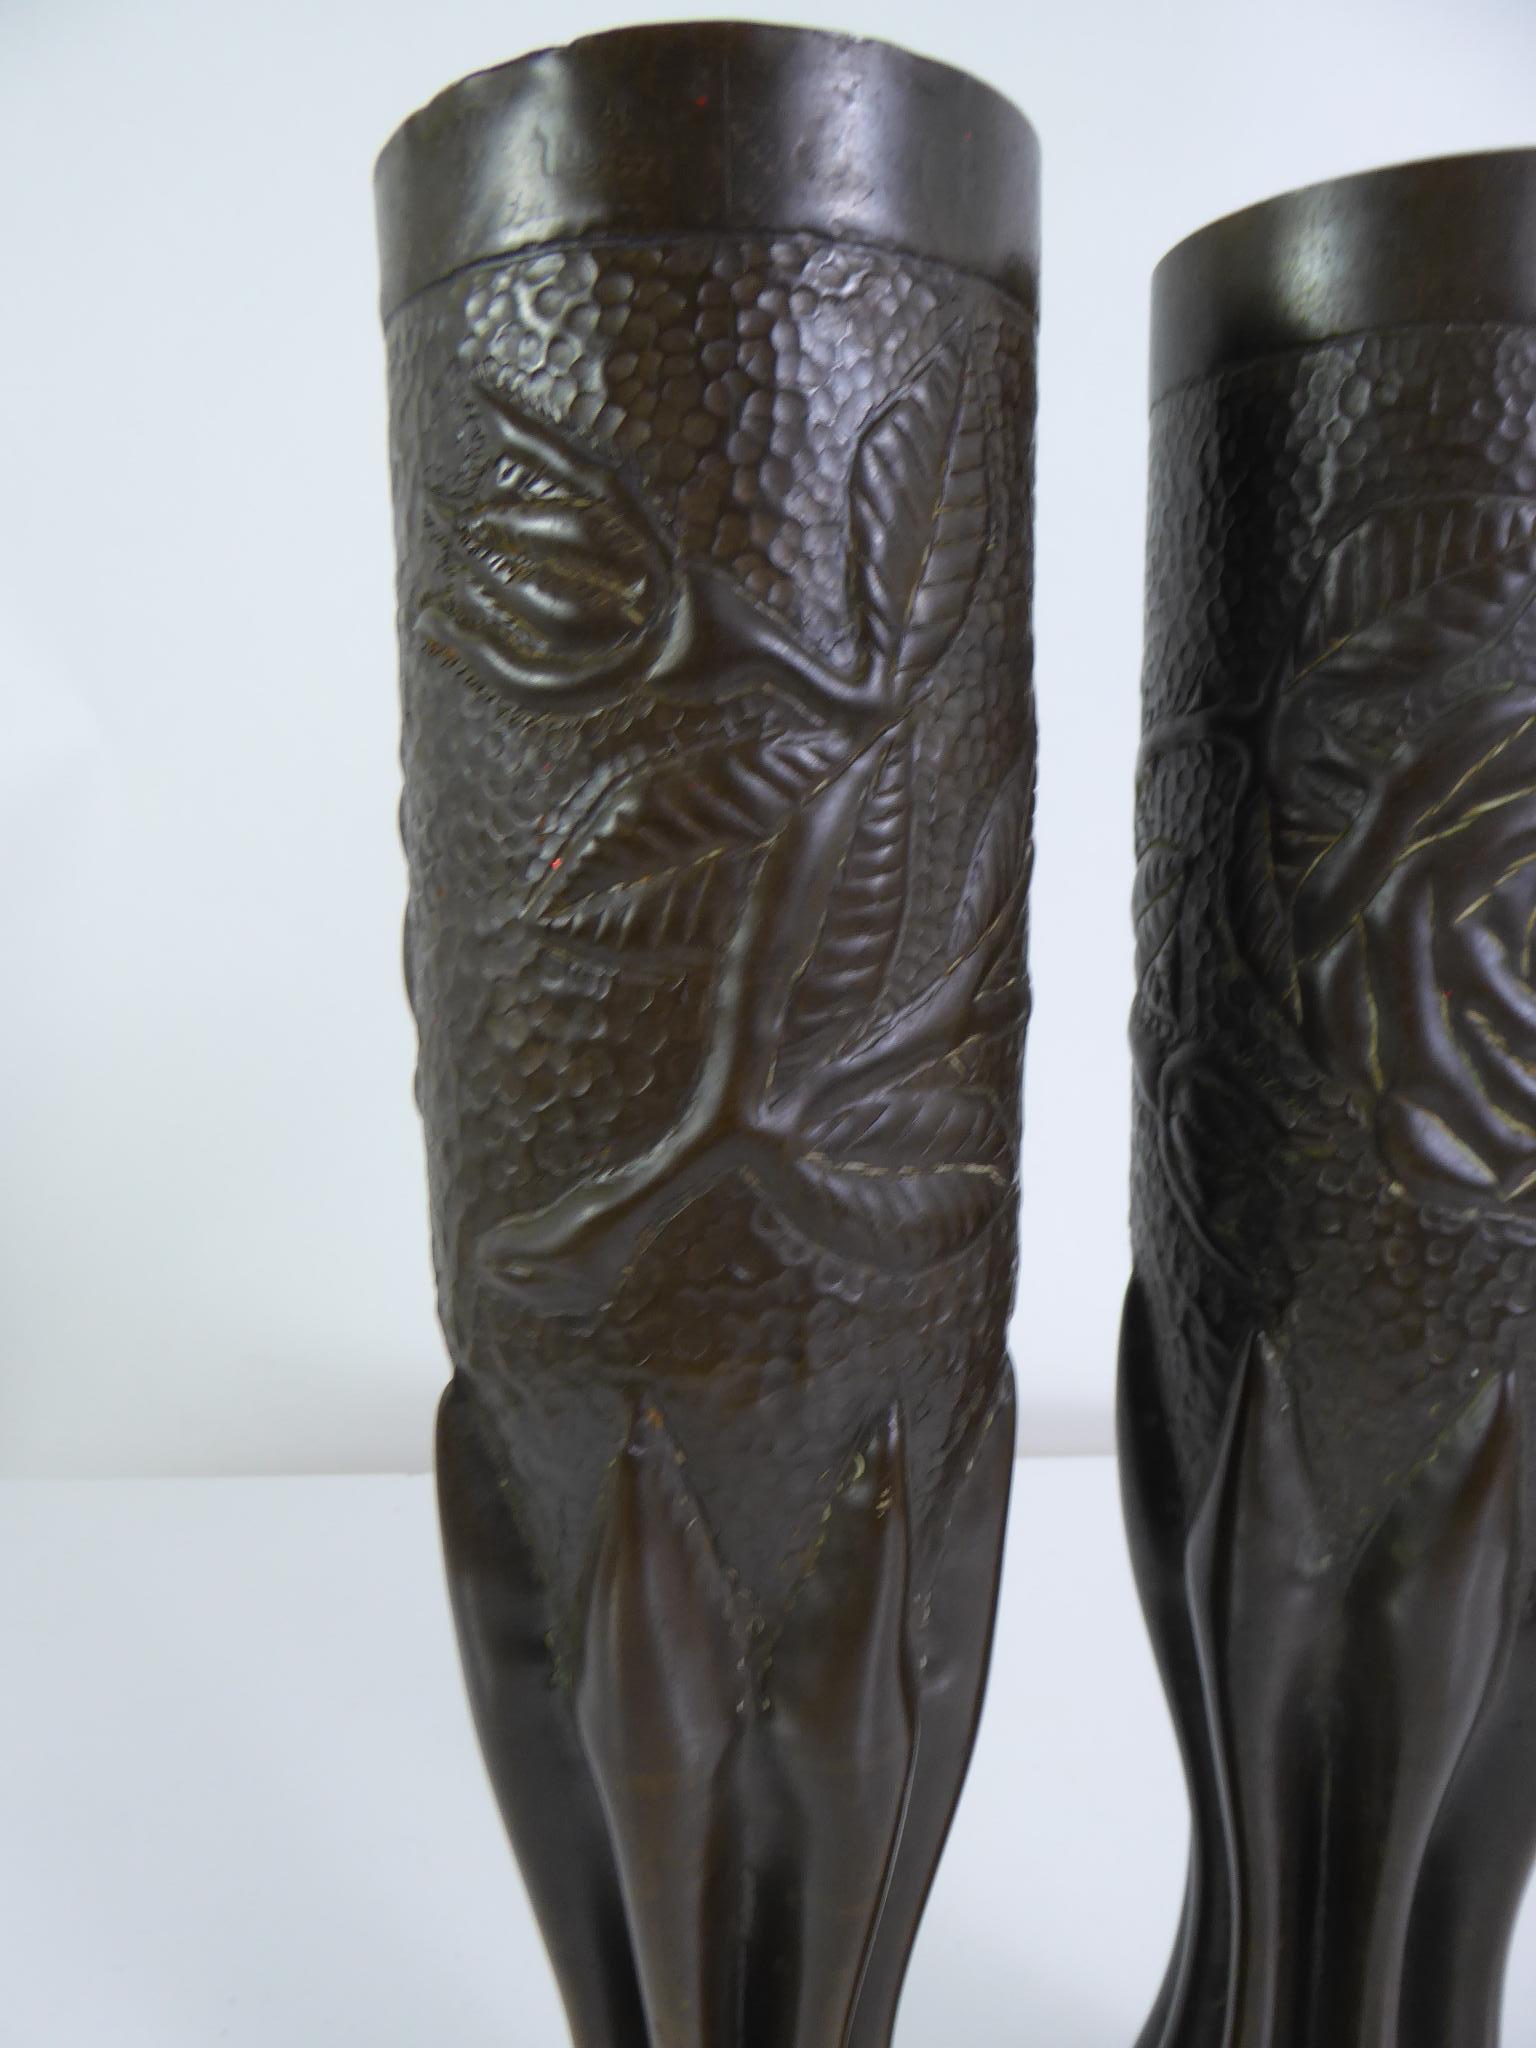 World War I Trench Art Pair of gorgeous decorated Vases made from bronze Artillery Shell casings. These vases are beatifully decorated with embossed images of flowers thus giving them a Romantic theme to a traumatic situation.

Trench Art is given